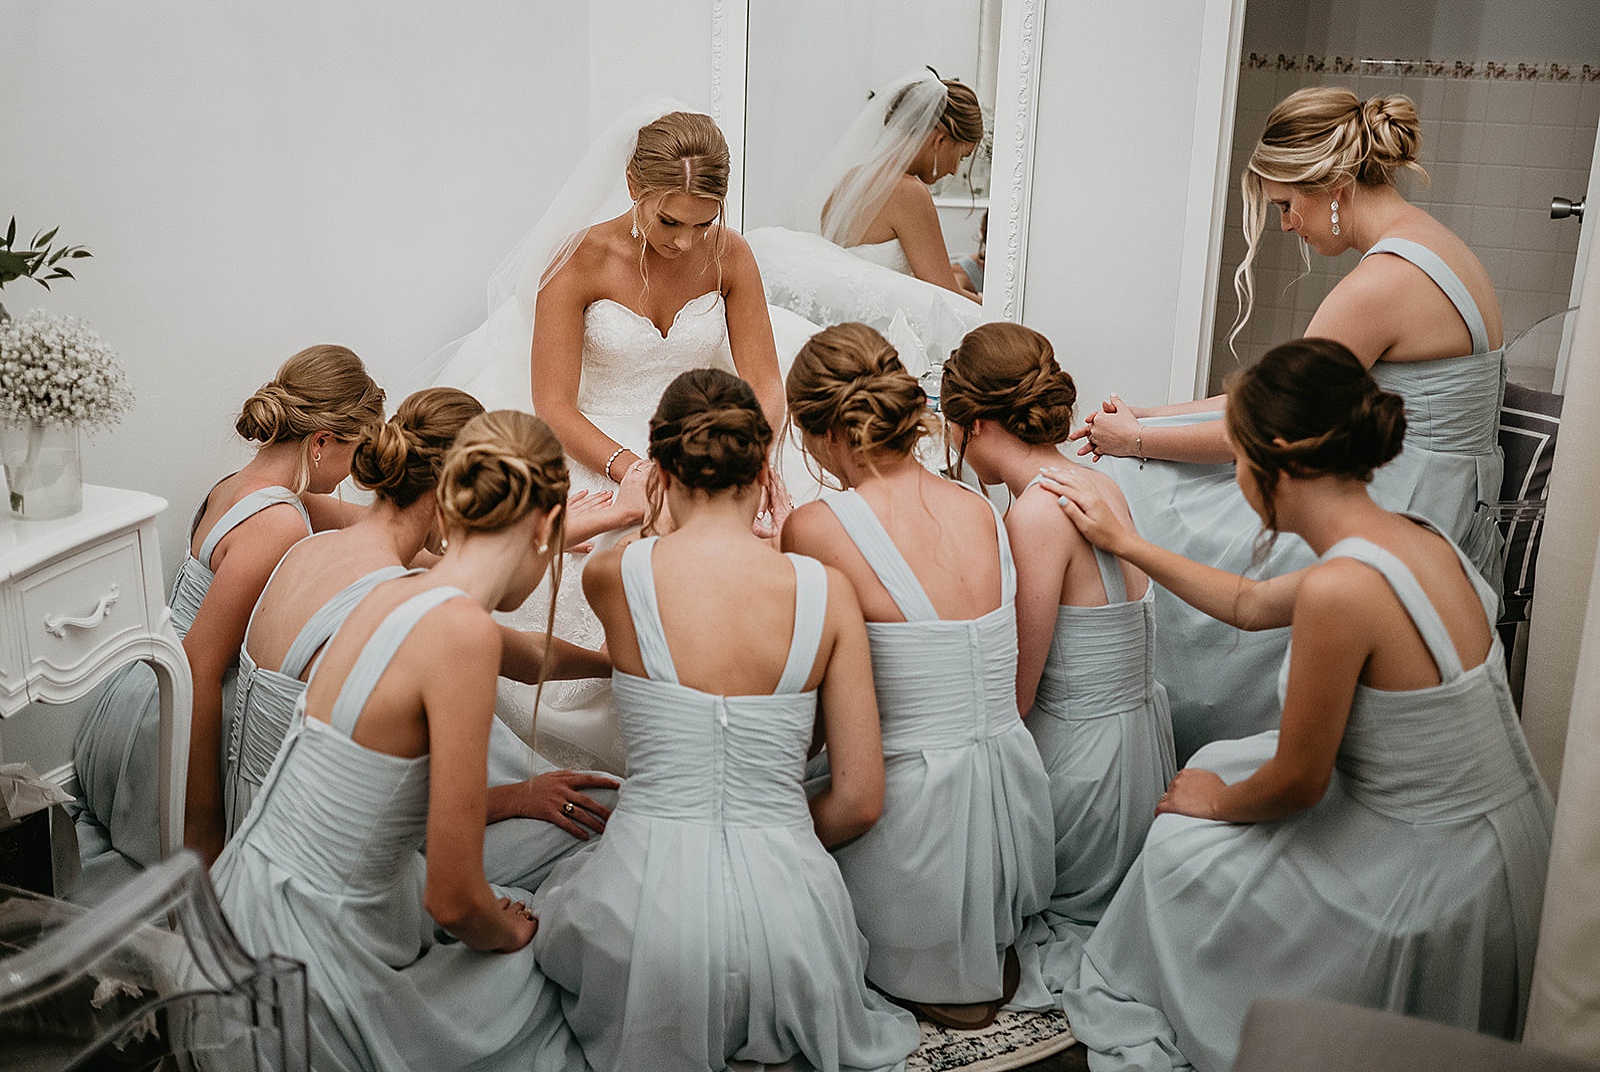 Family Church Downtown Wedding captured by West Palm Beach Wedding Photographer, Krystal Capone Photography